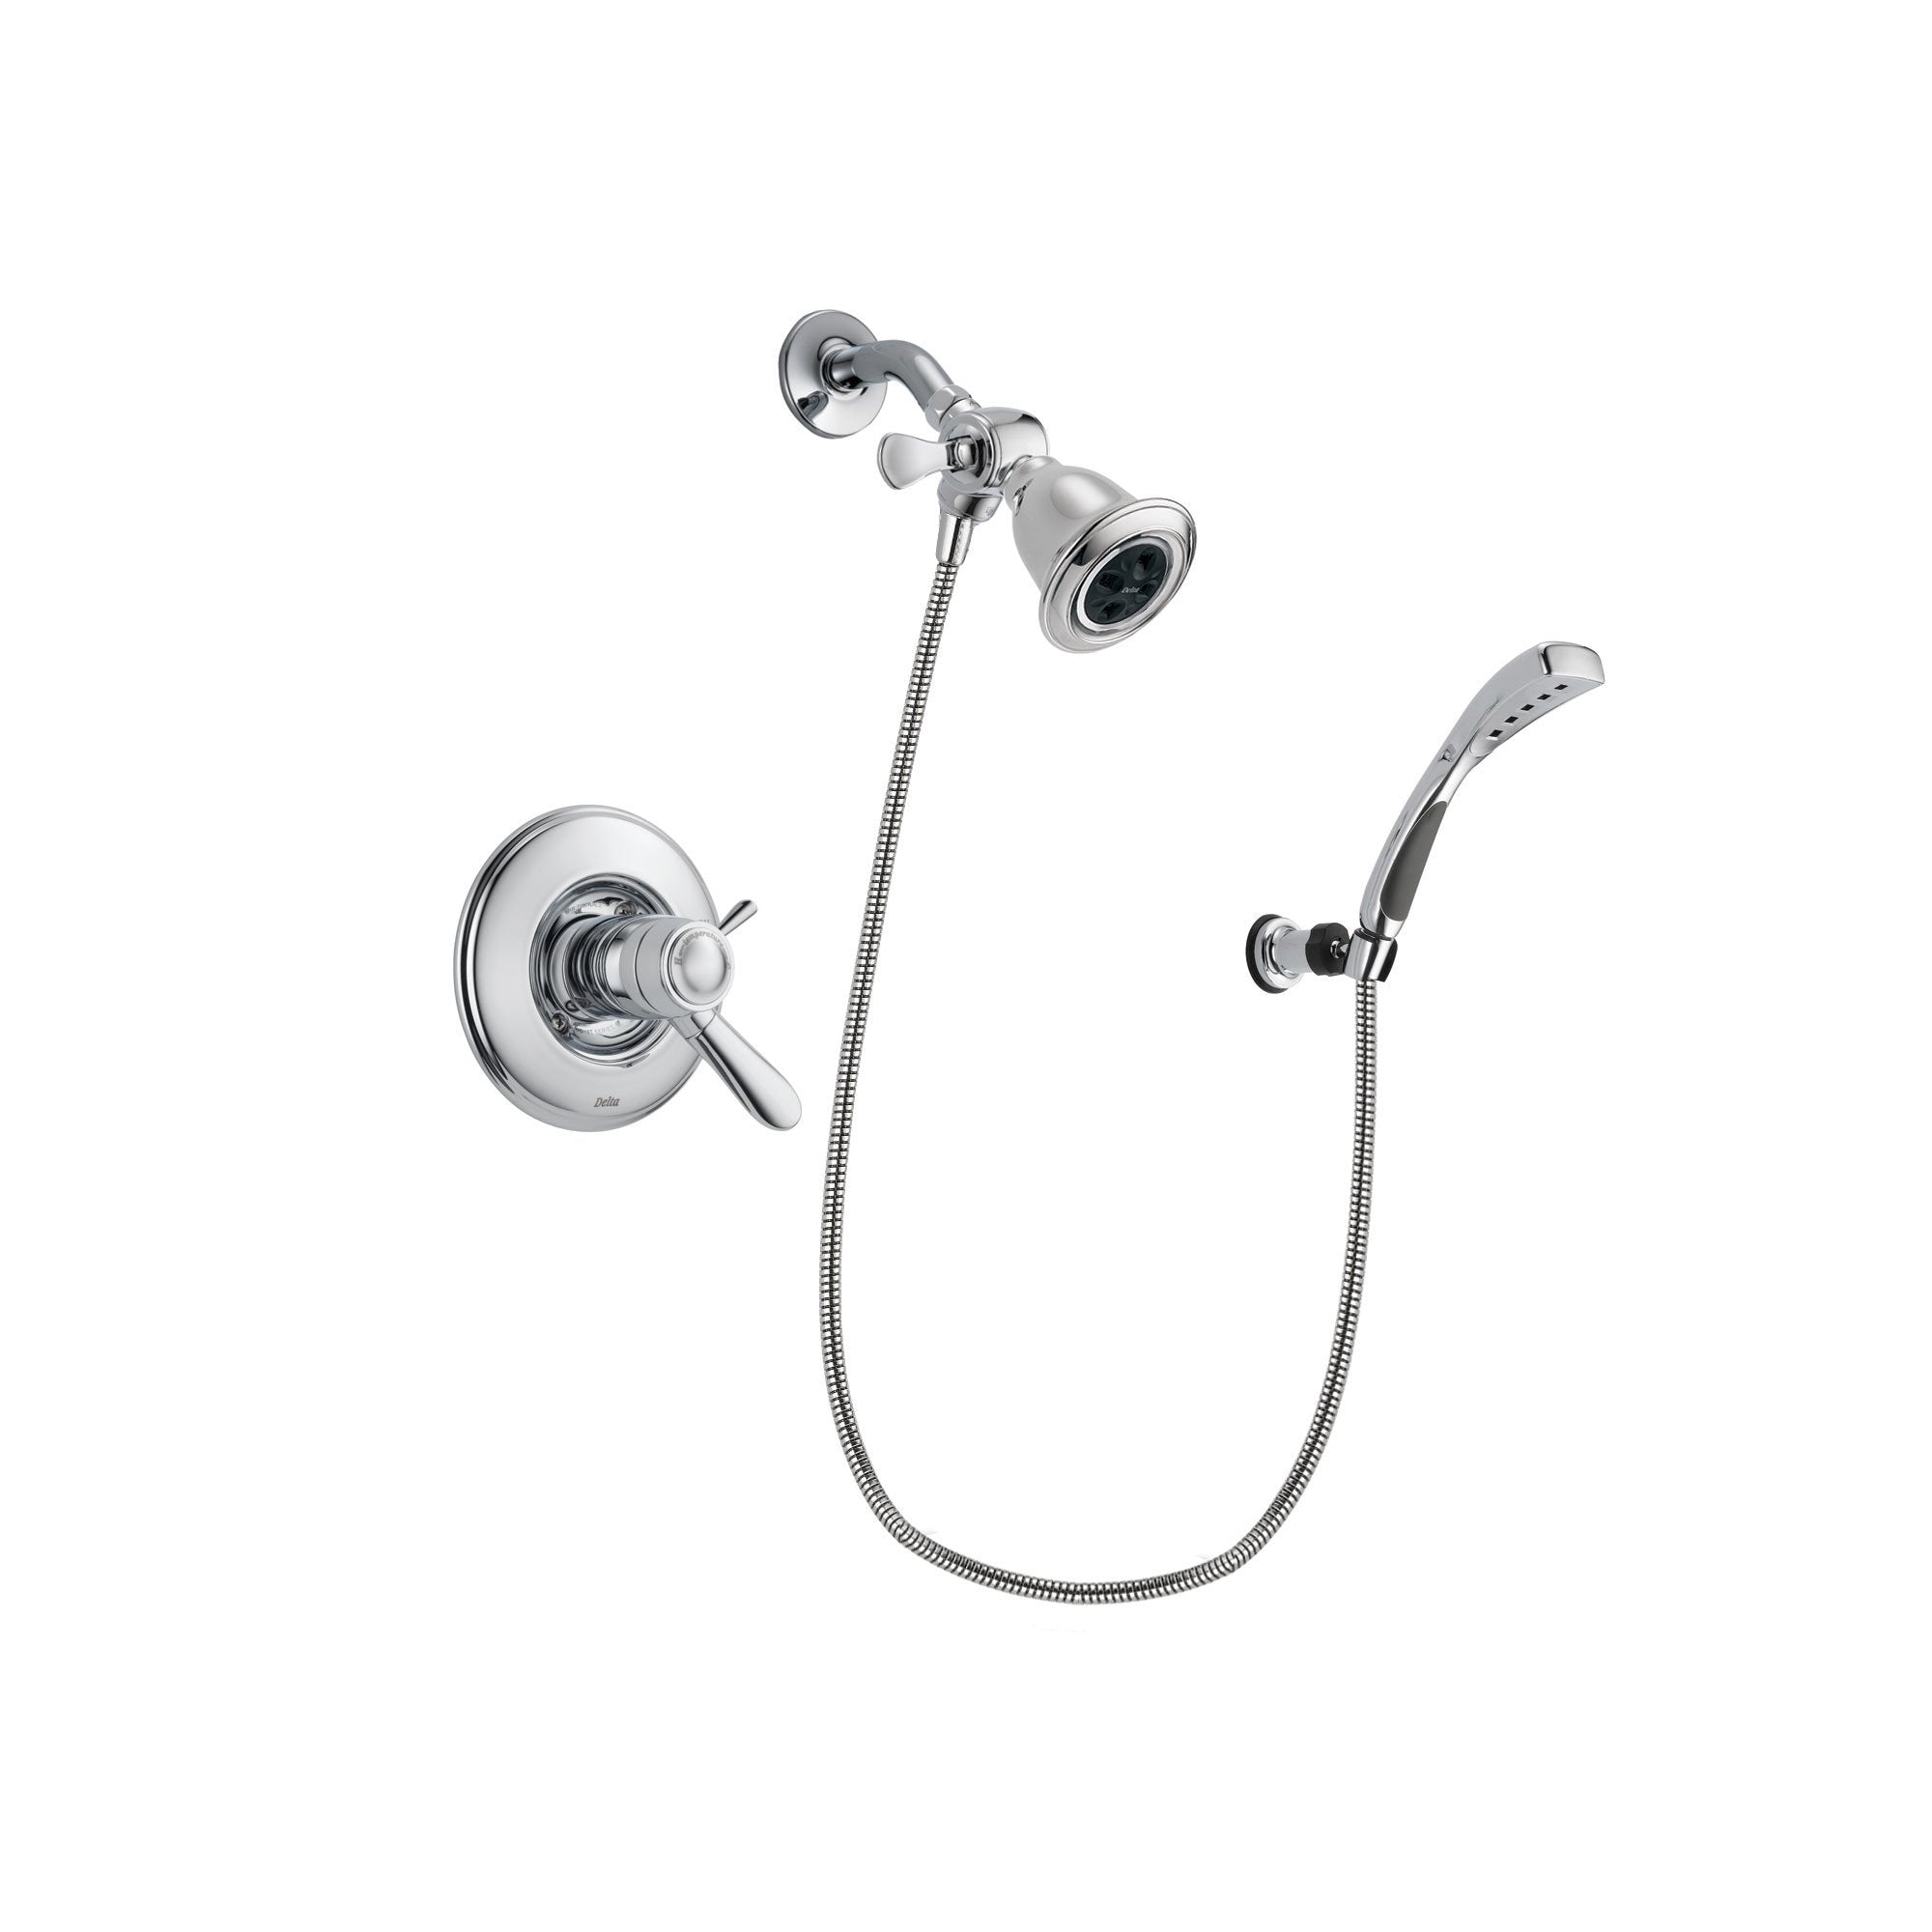 Delta Lahara Chrome Finish Thermostatic Shower Faucet System Package with Water Efficient Showerhead and Wall-Mount Bracket with Handheld Shower Spray Includes Rough-in Valve DSP1004V